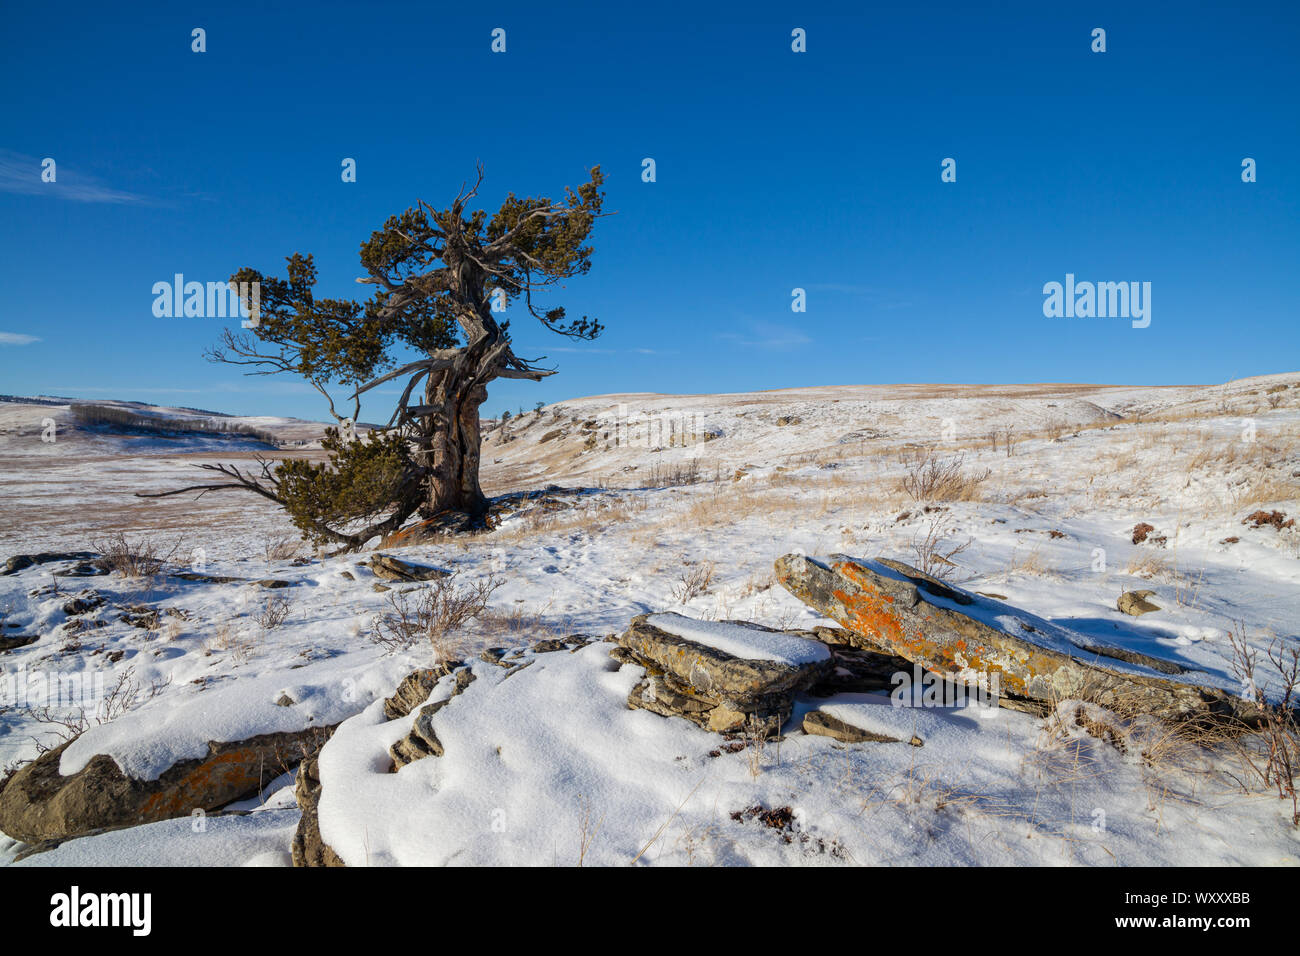 An old limber pine growing on a rocky outcrop in southern Alberta, Canada in winter Stock Photo